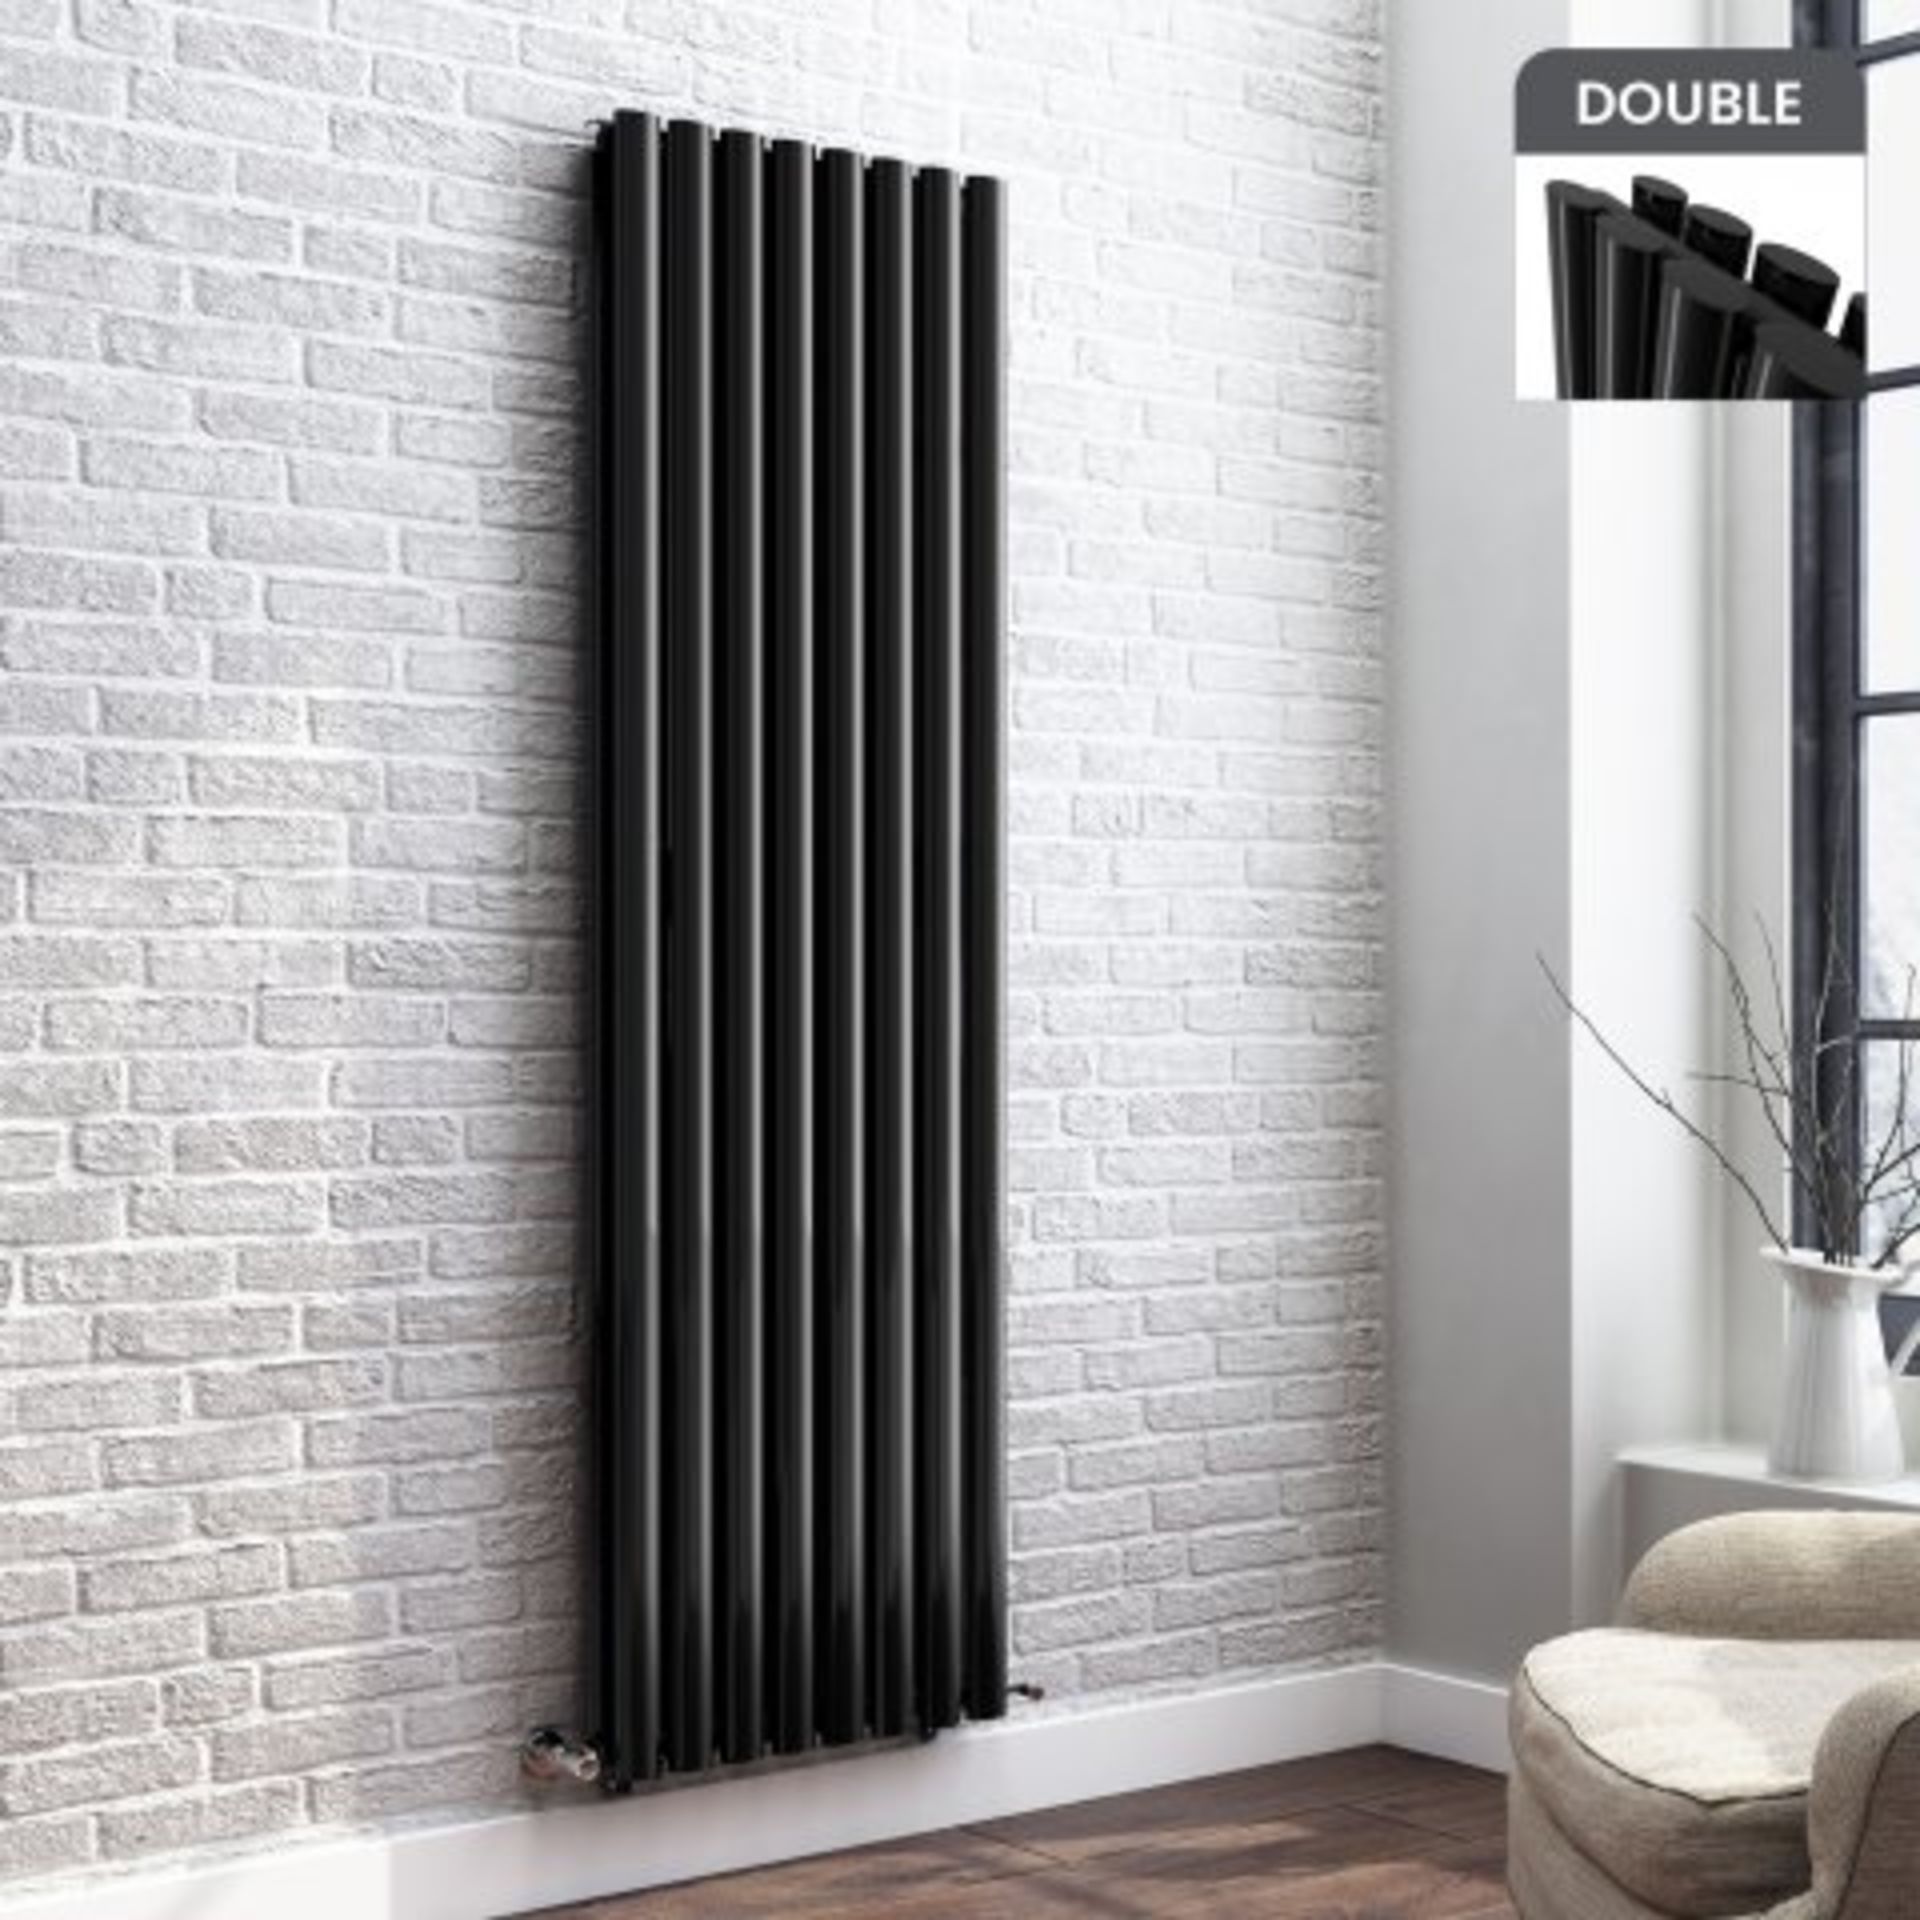 (A534) 1600x480mm Black Double Oval Tube Vertical Radiator - Ember Premium. RRP £351.98. Want to add